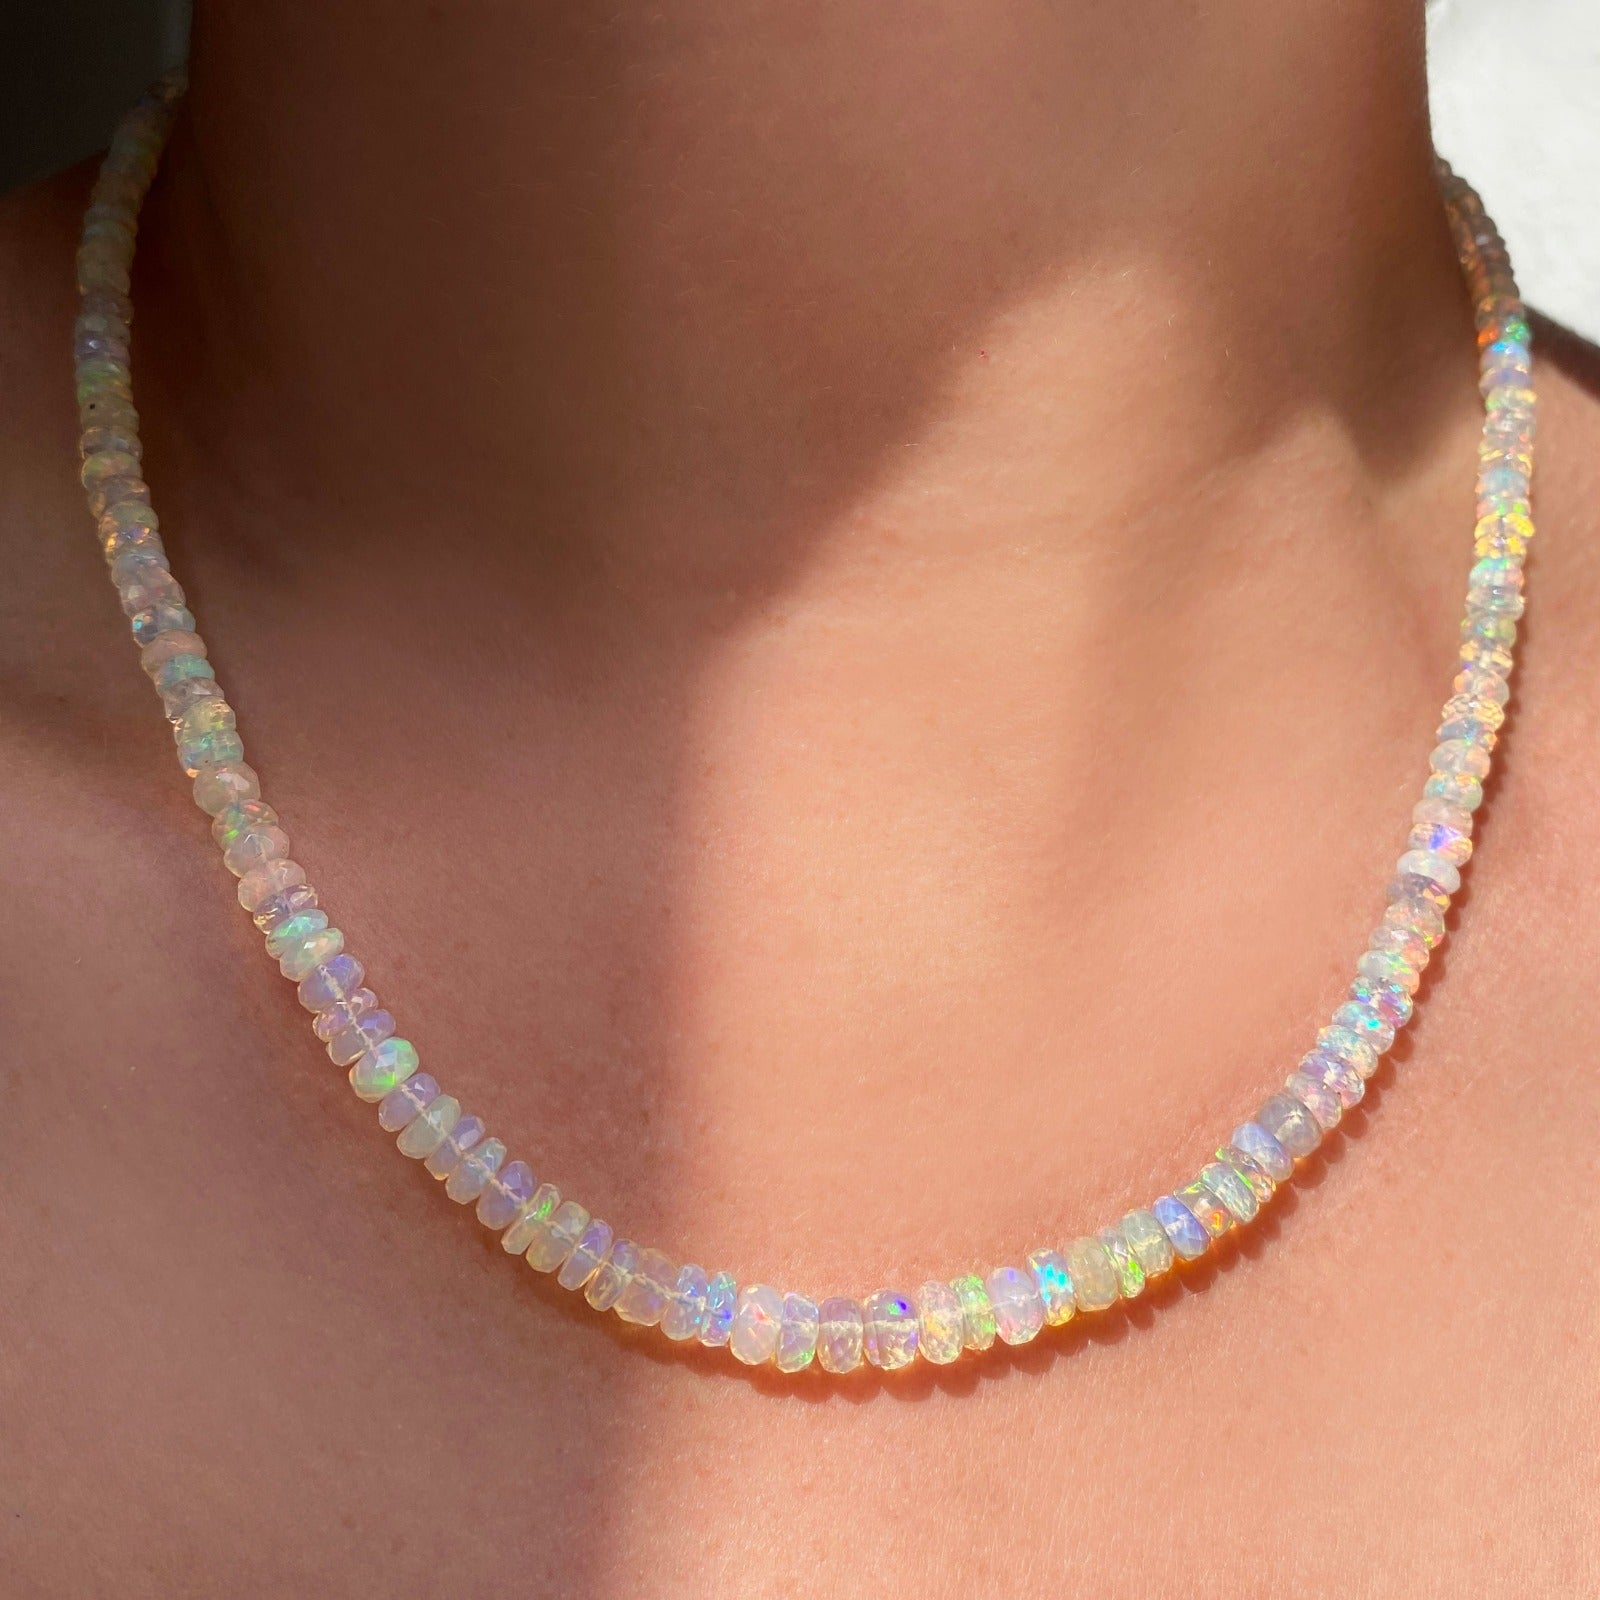 Buy Ethiopian Opal Necklace 925 Silver Necklace Wedding Necklace Bridal  Necklace AAA Quality Fire Opal Jewelry Gift for Her Online in India - Etsy